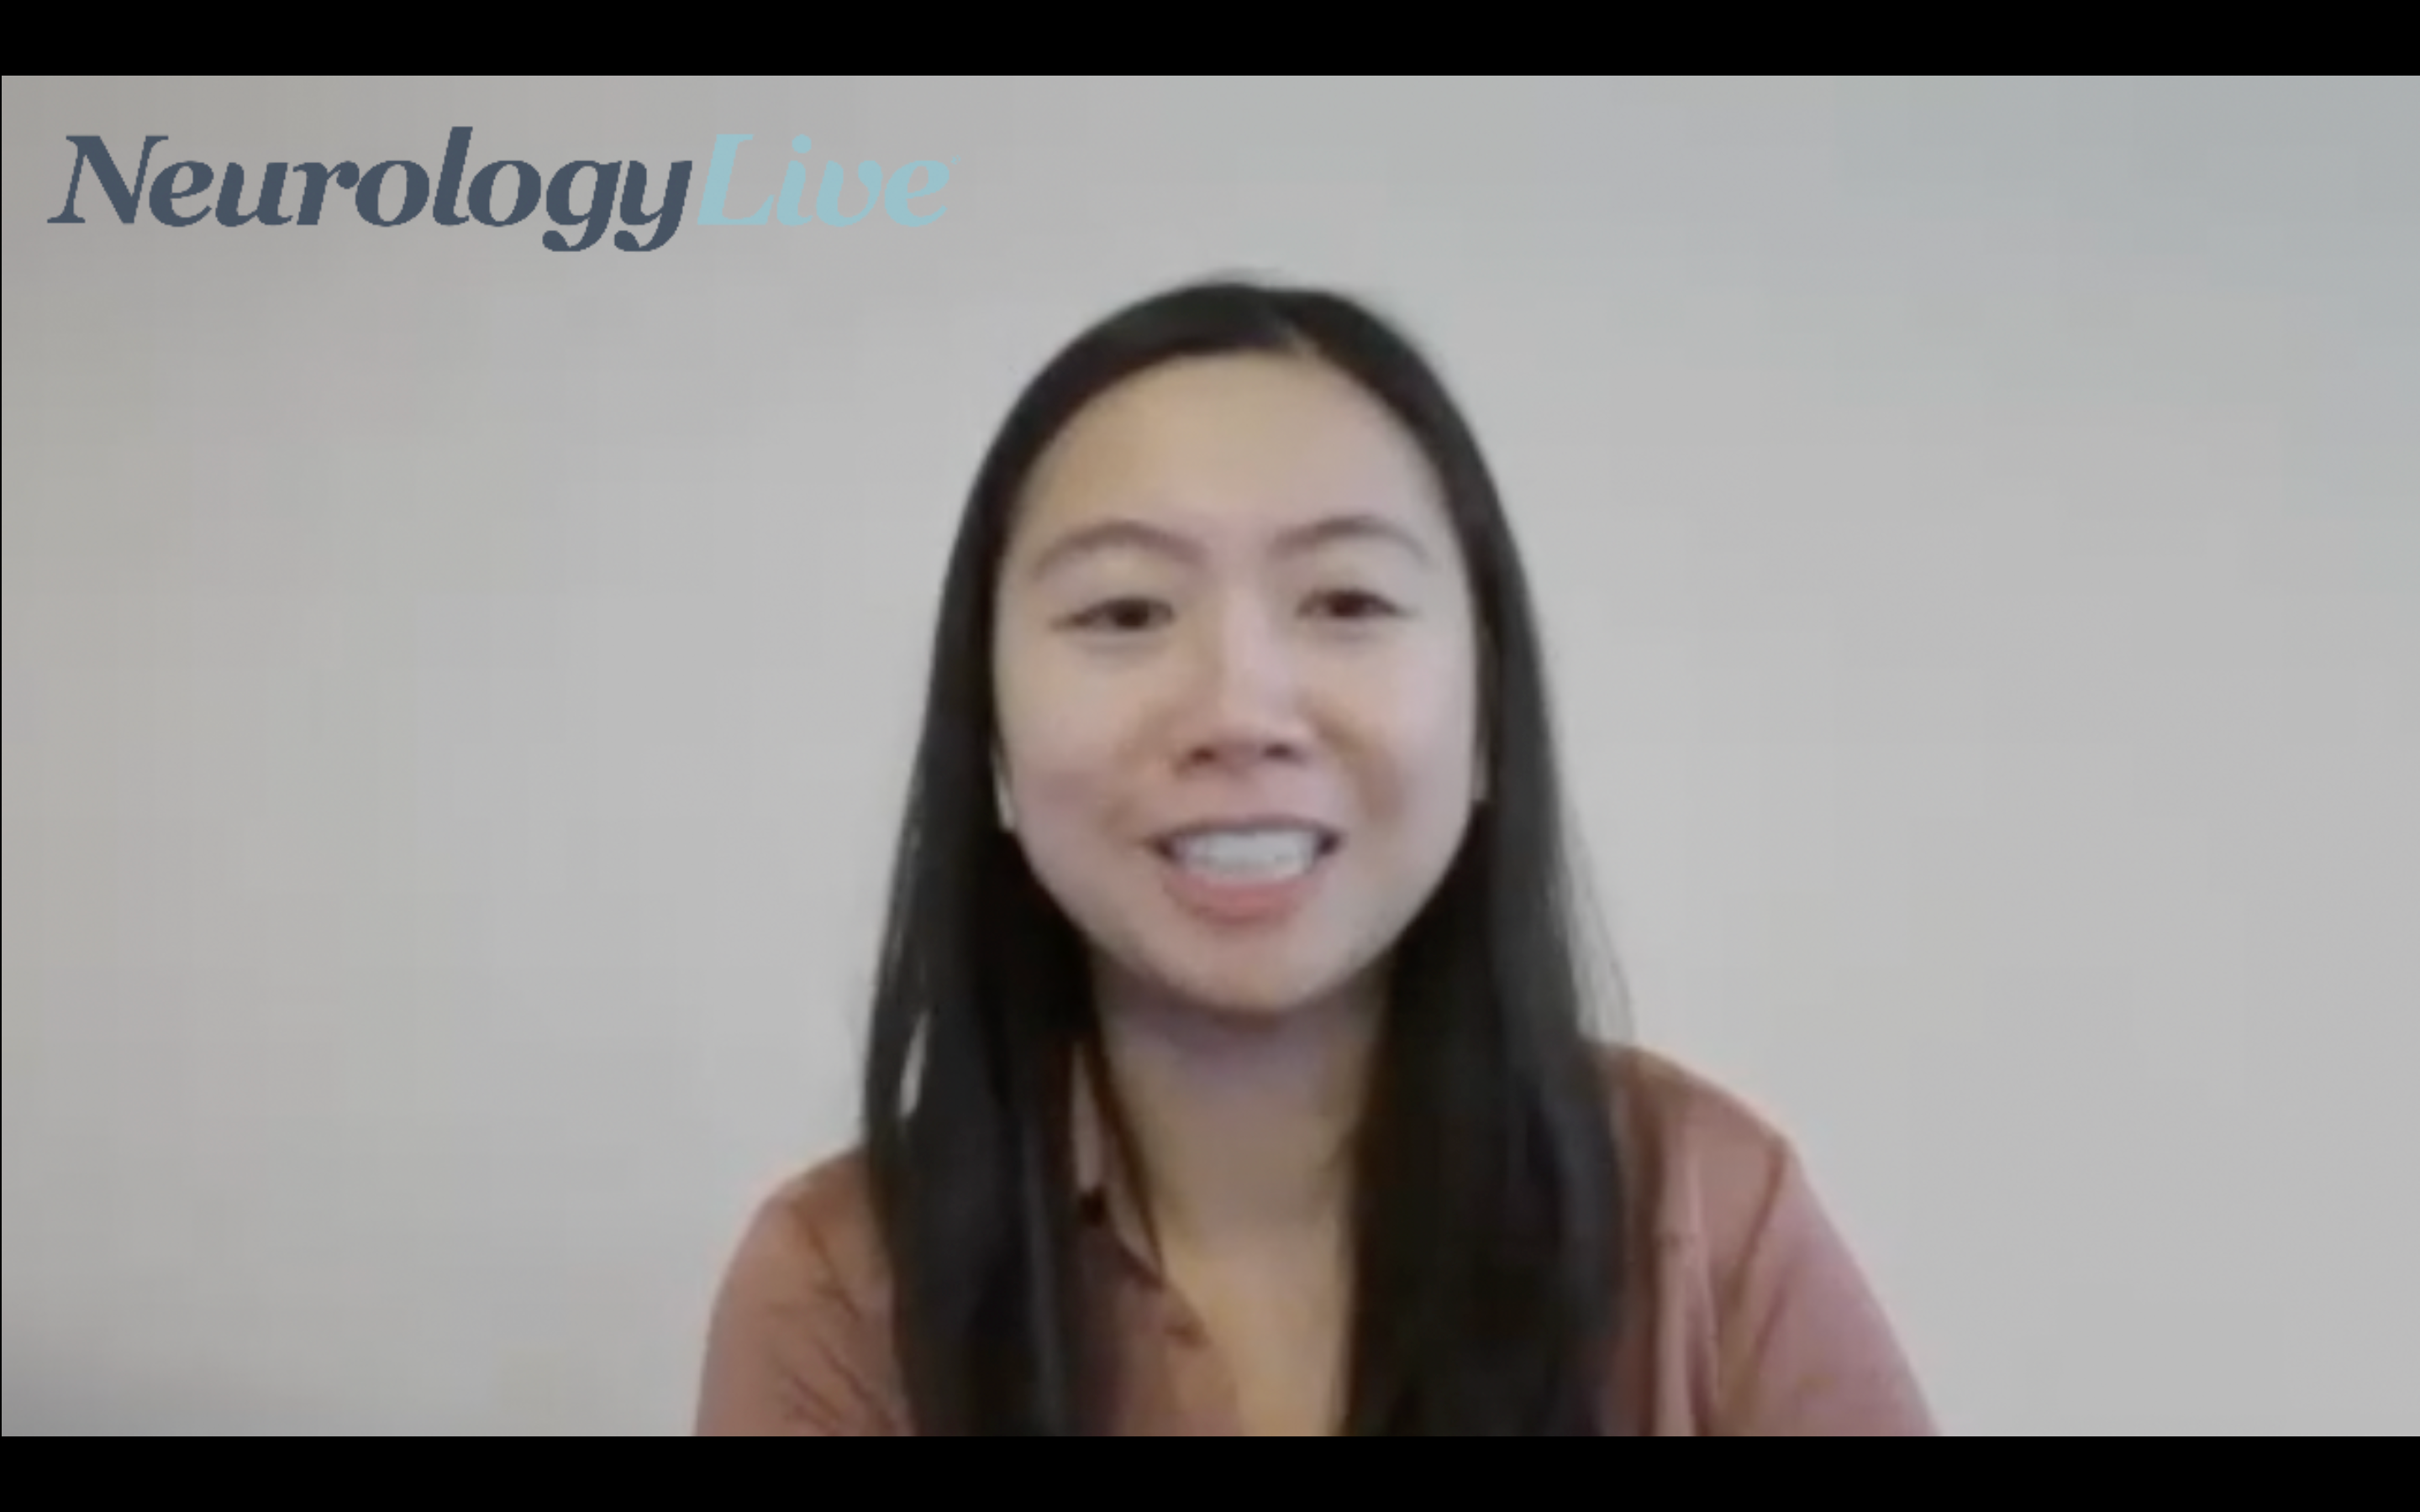 Remote Monitoring Patients Through Smartphone Applications: Michelle Chen, PhD